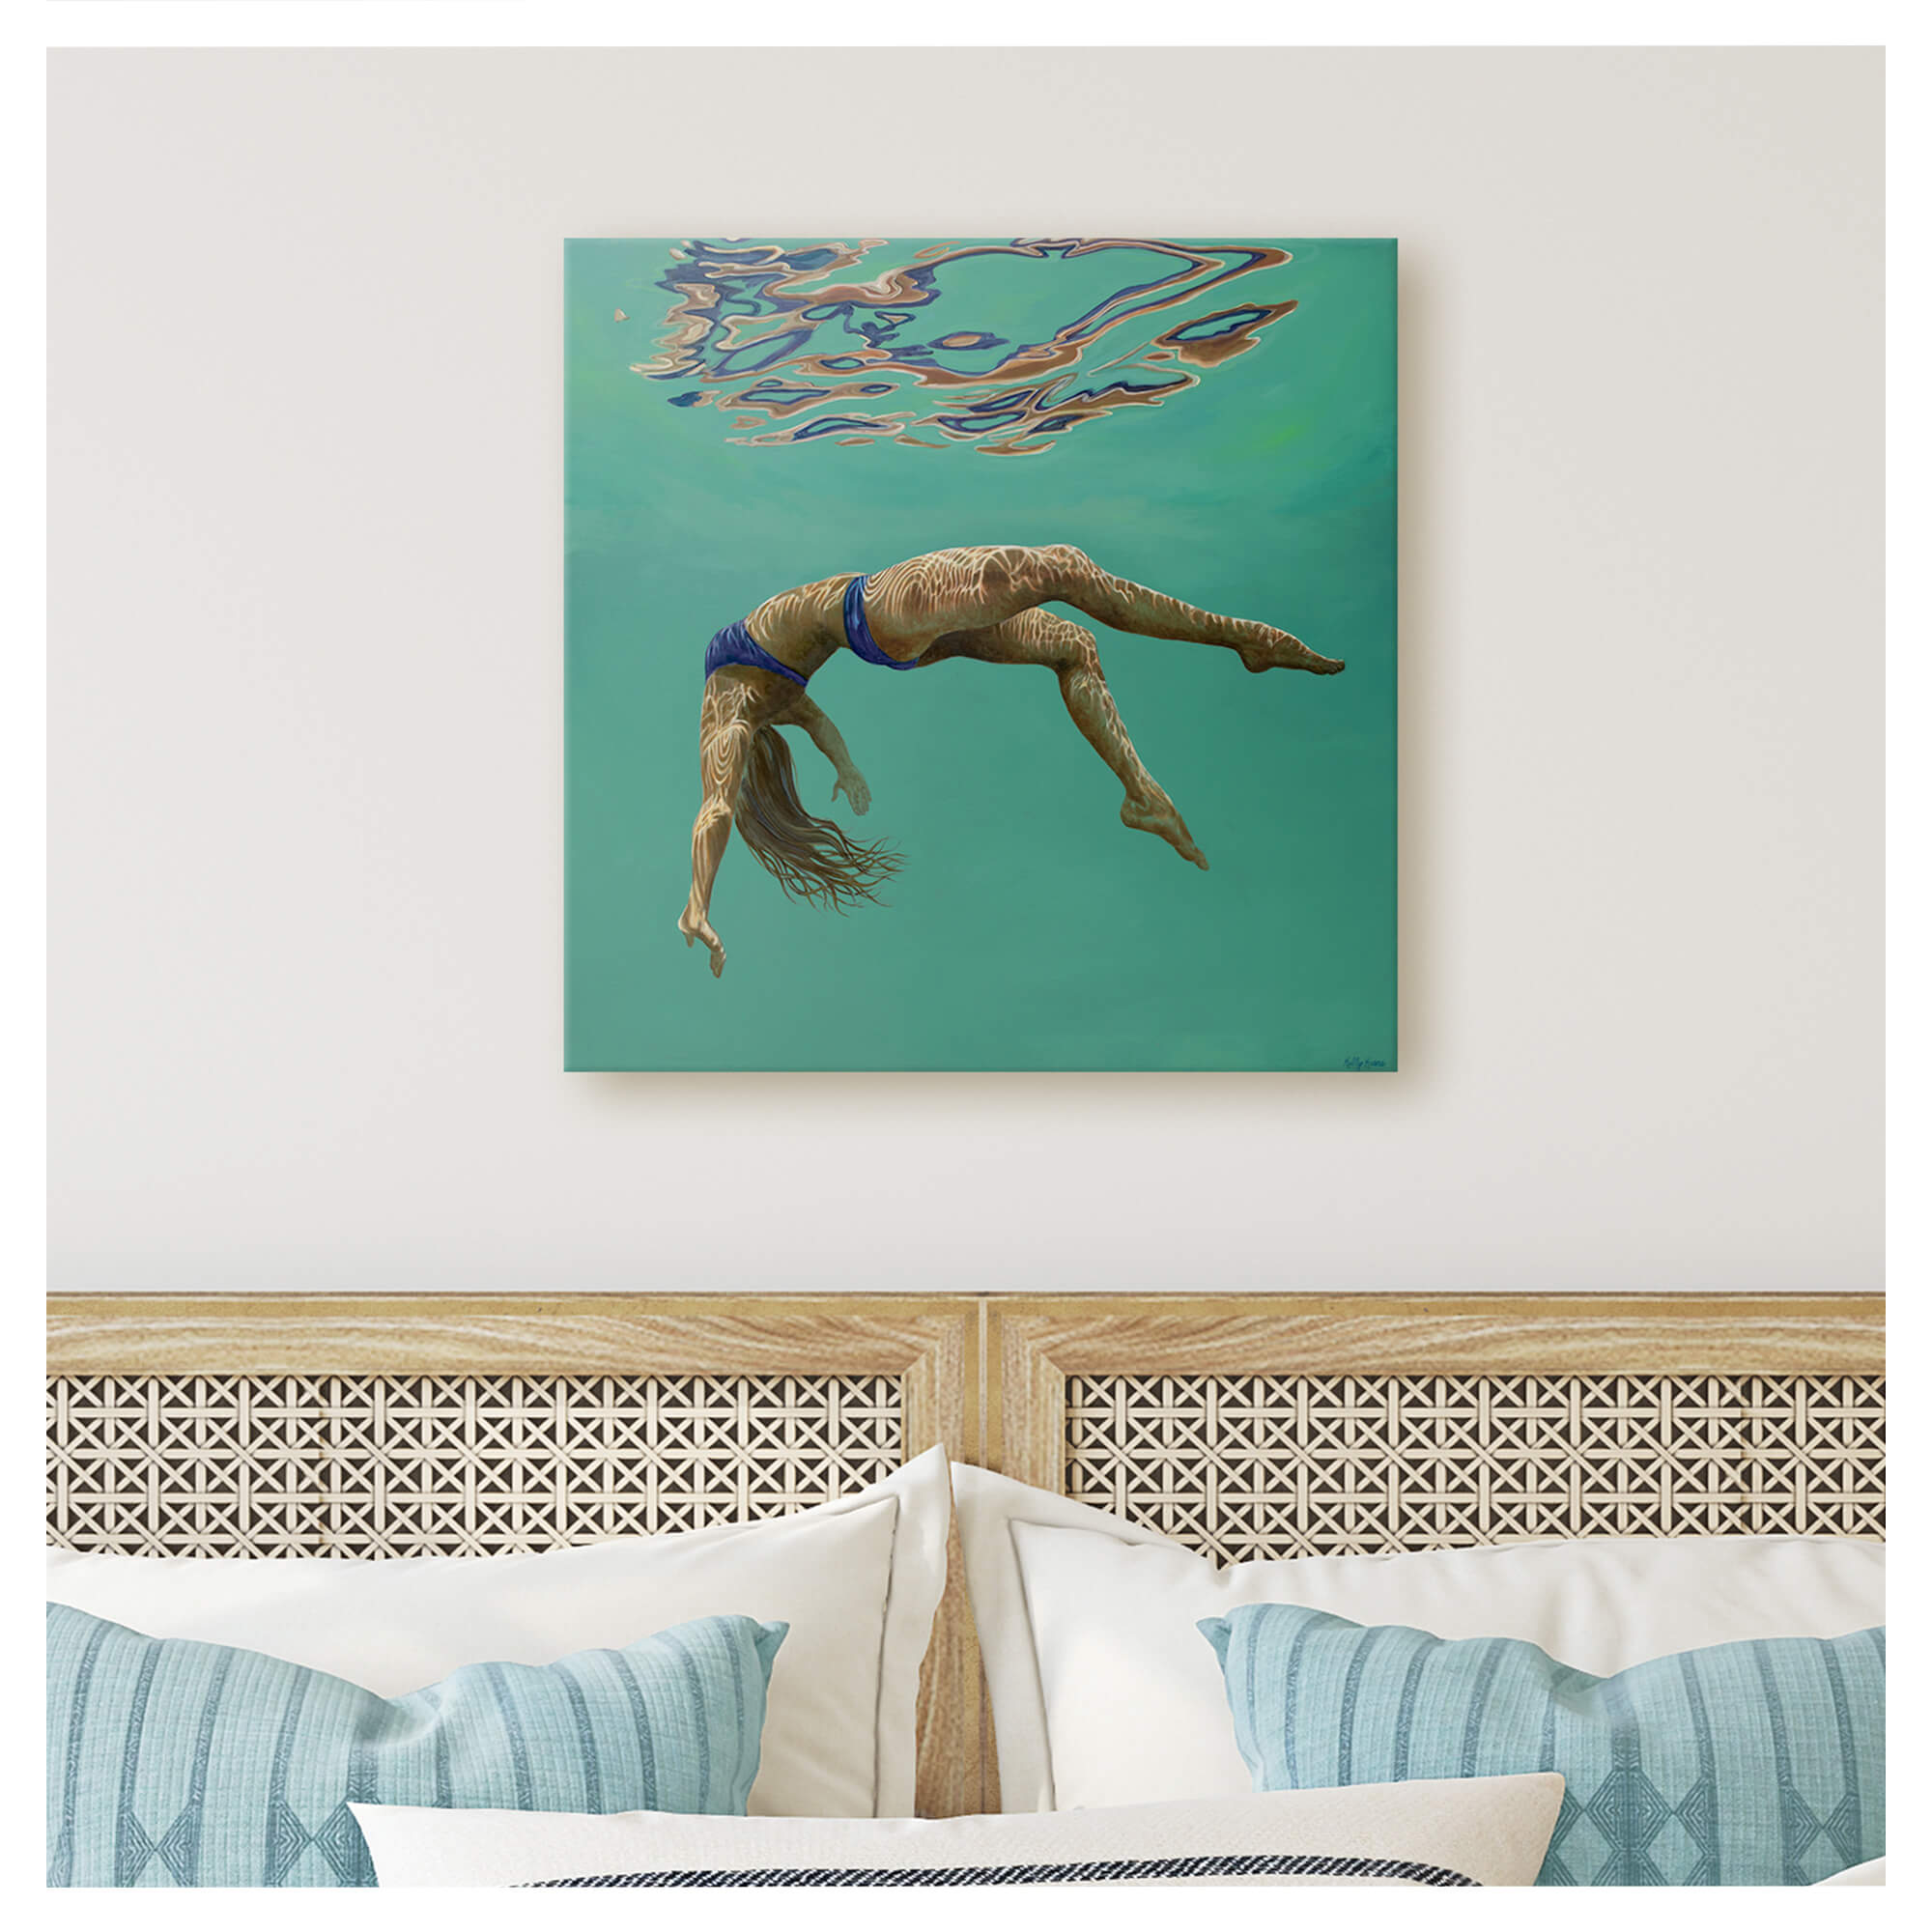 Canvas giclée art print of a woman free diving by Hawaii artist Kelly Keane